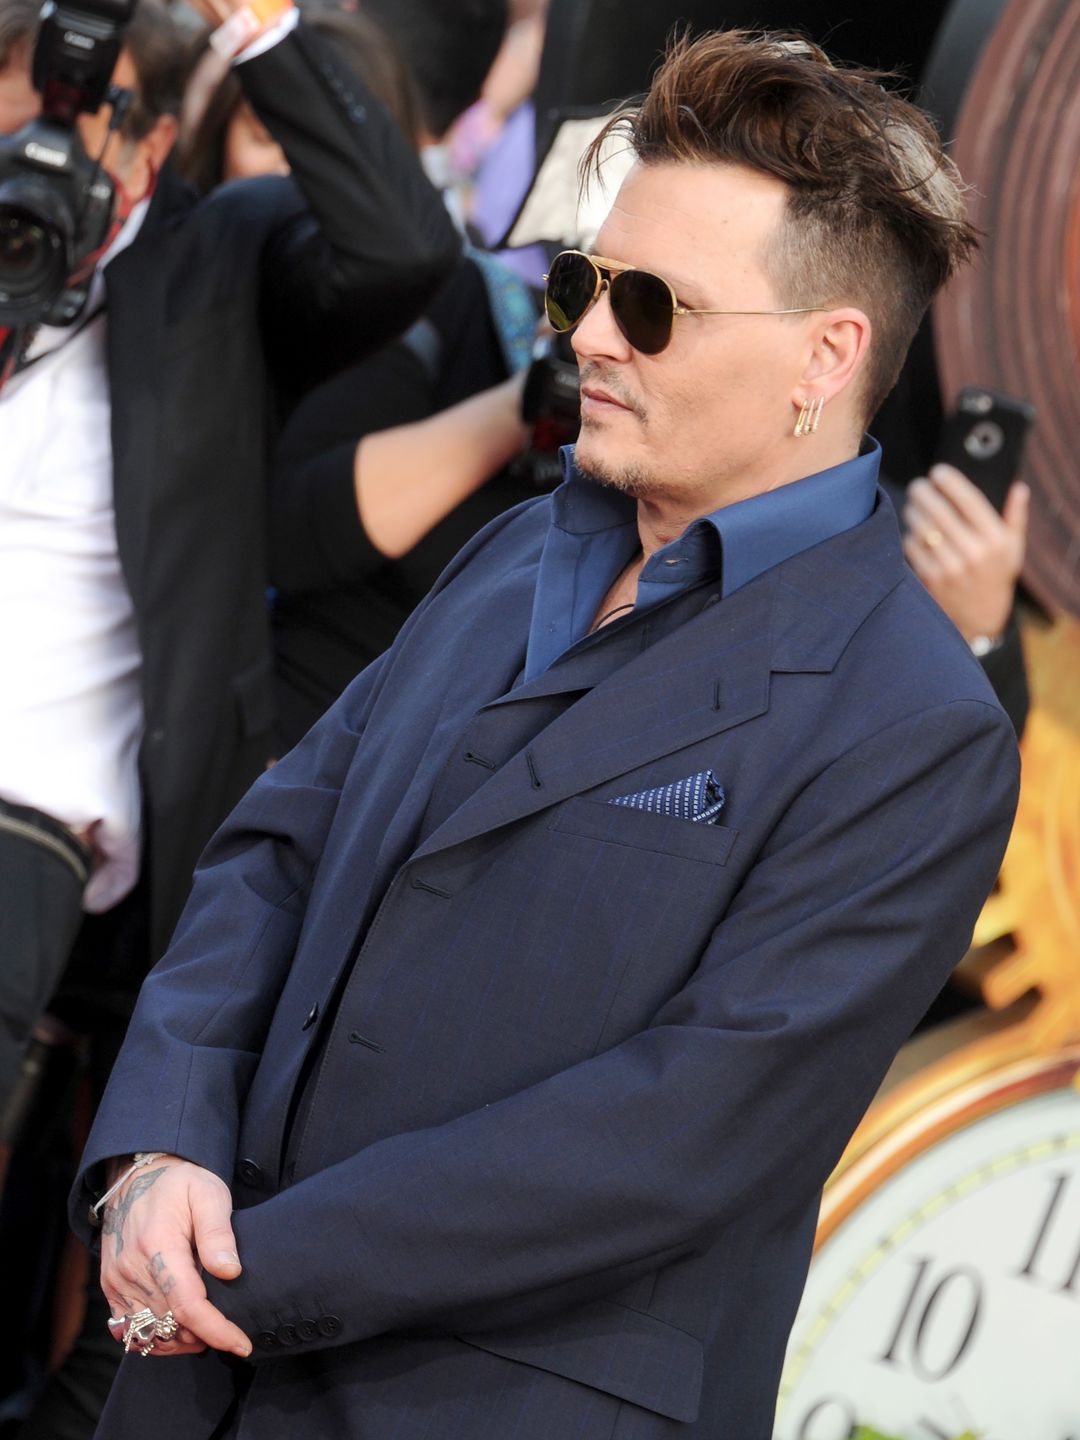 Johnny at the premiere for Alice Through The Looking Glass in a blue suit and wearing sunglasses